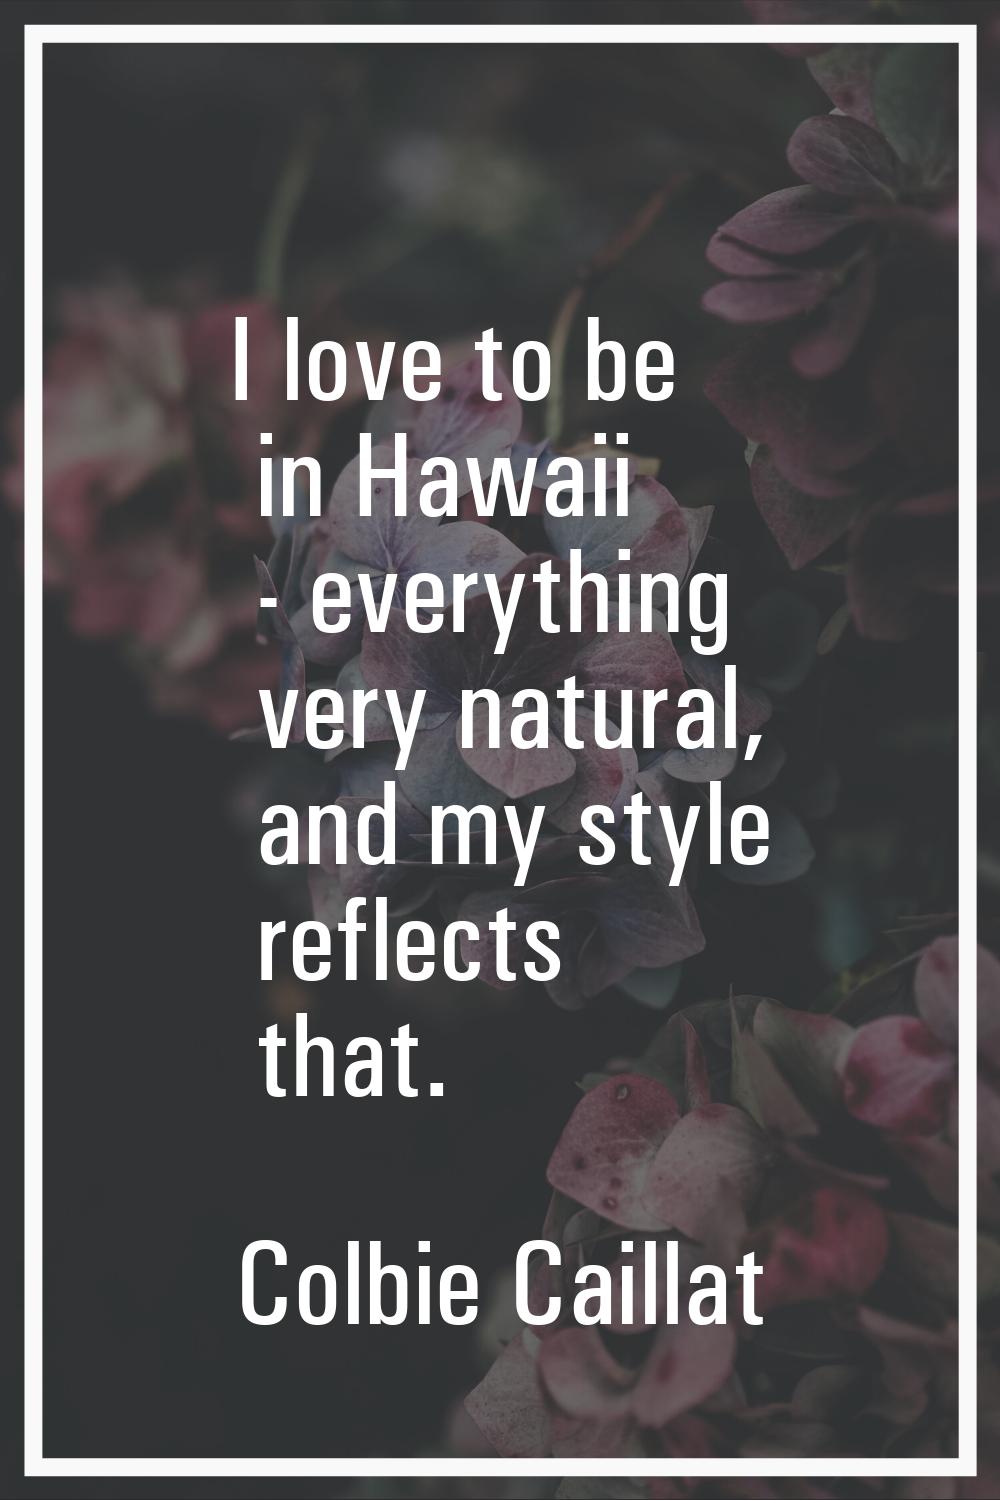 I love to be in Hawaii - everything very natural, and my style reflects that.